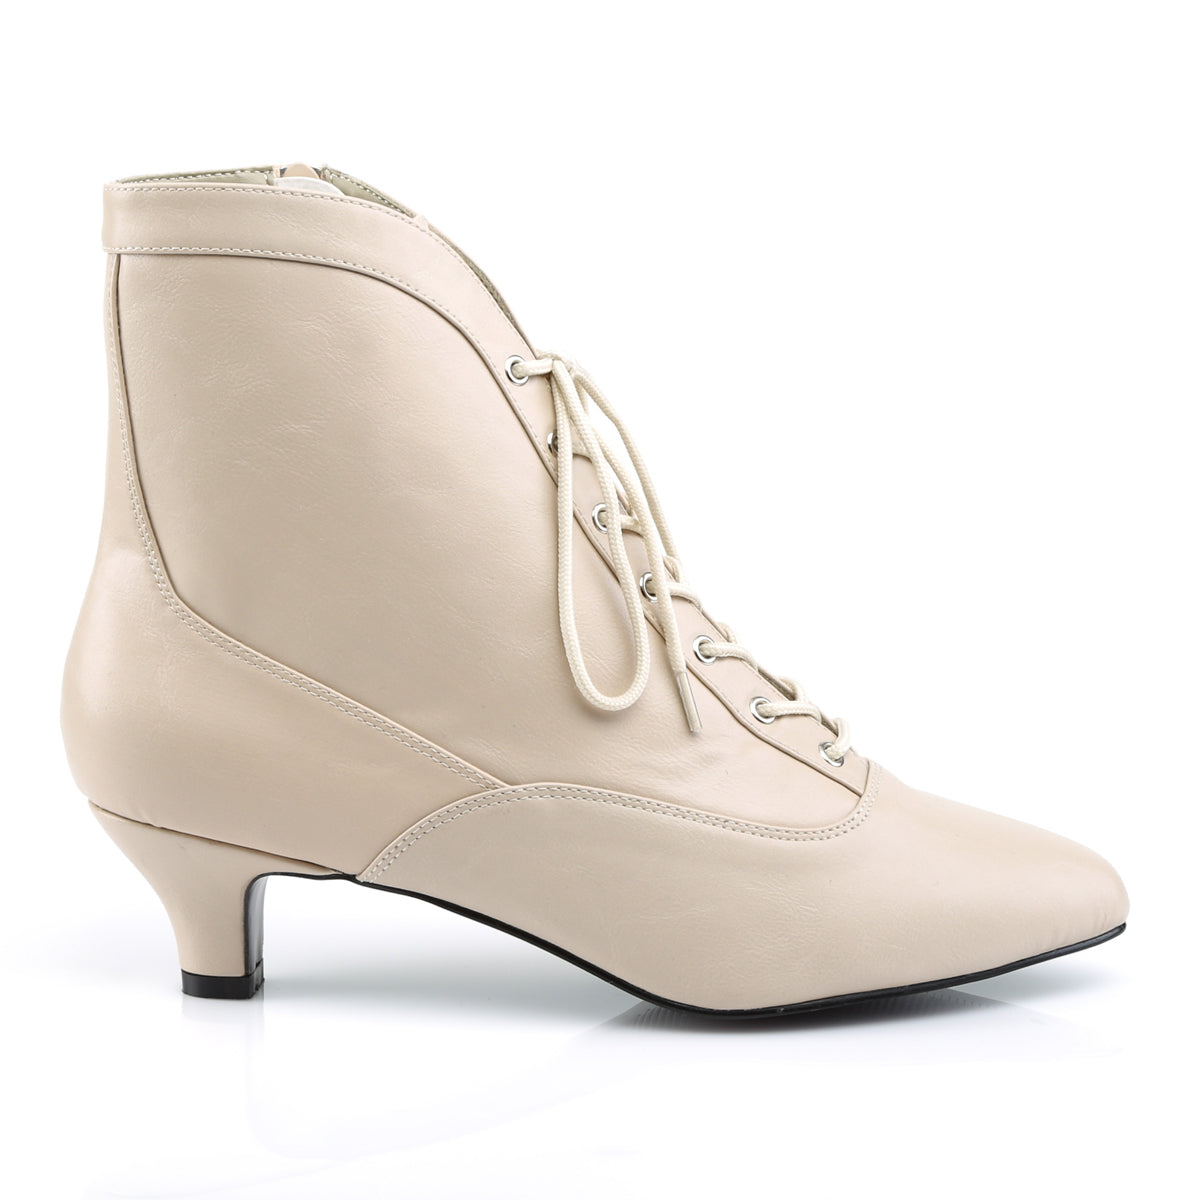 Large Size Victorian Boots Cream